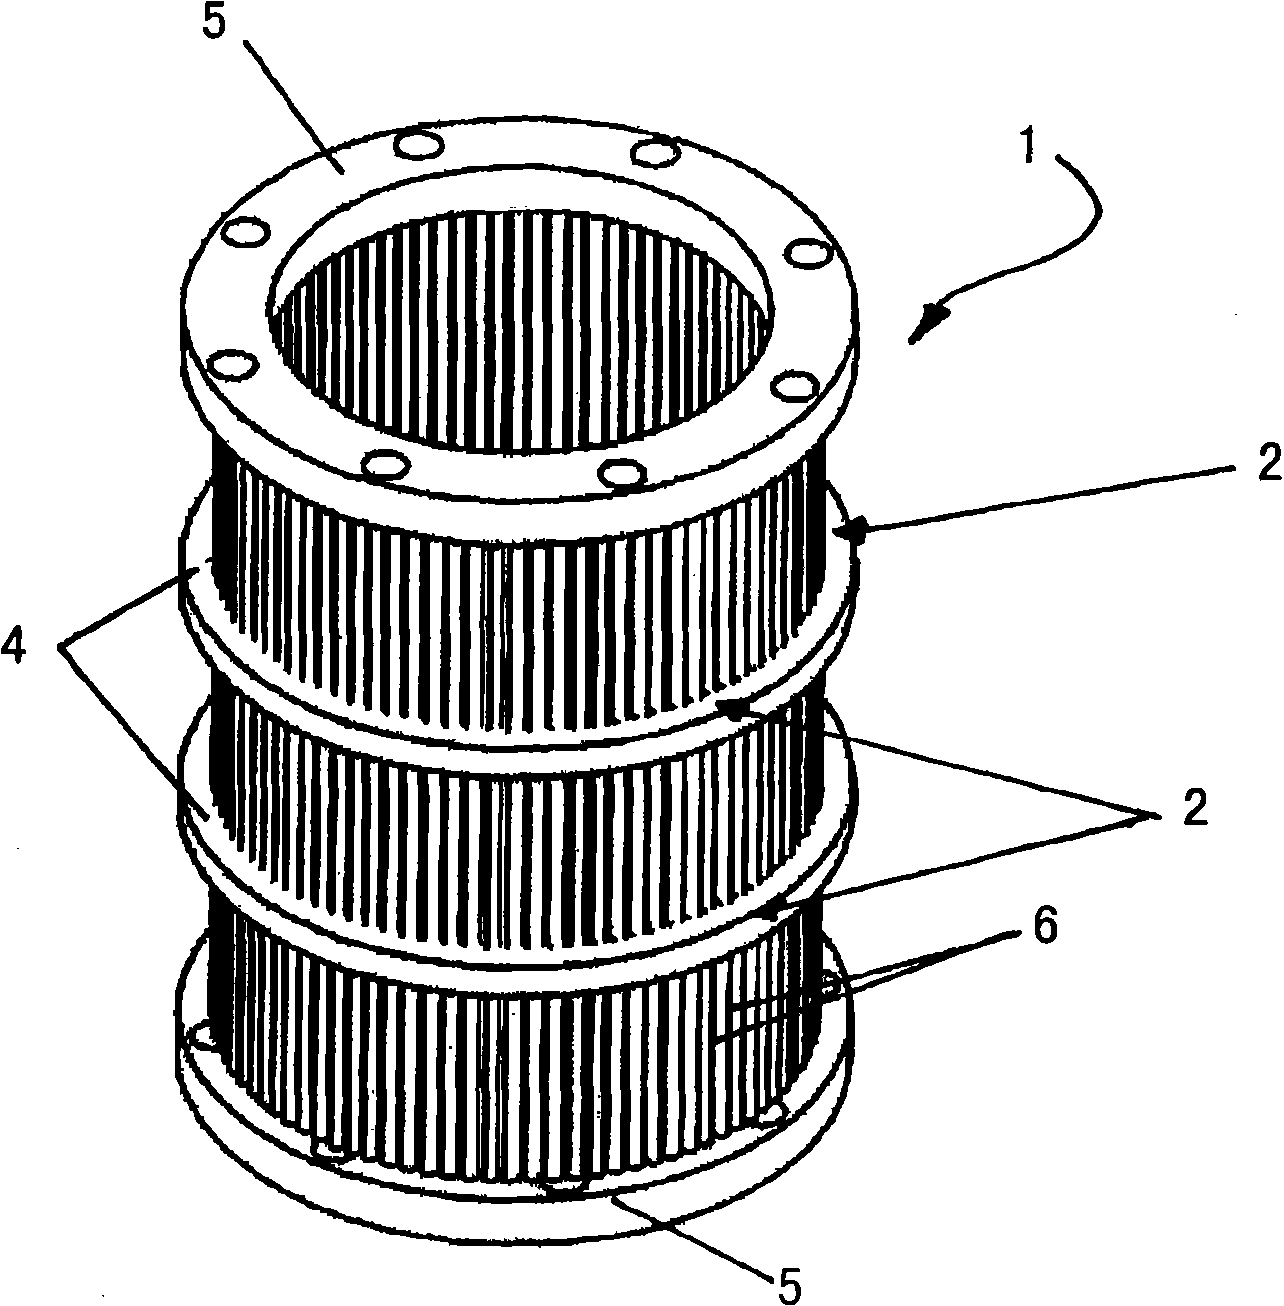 Sifting device